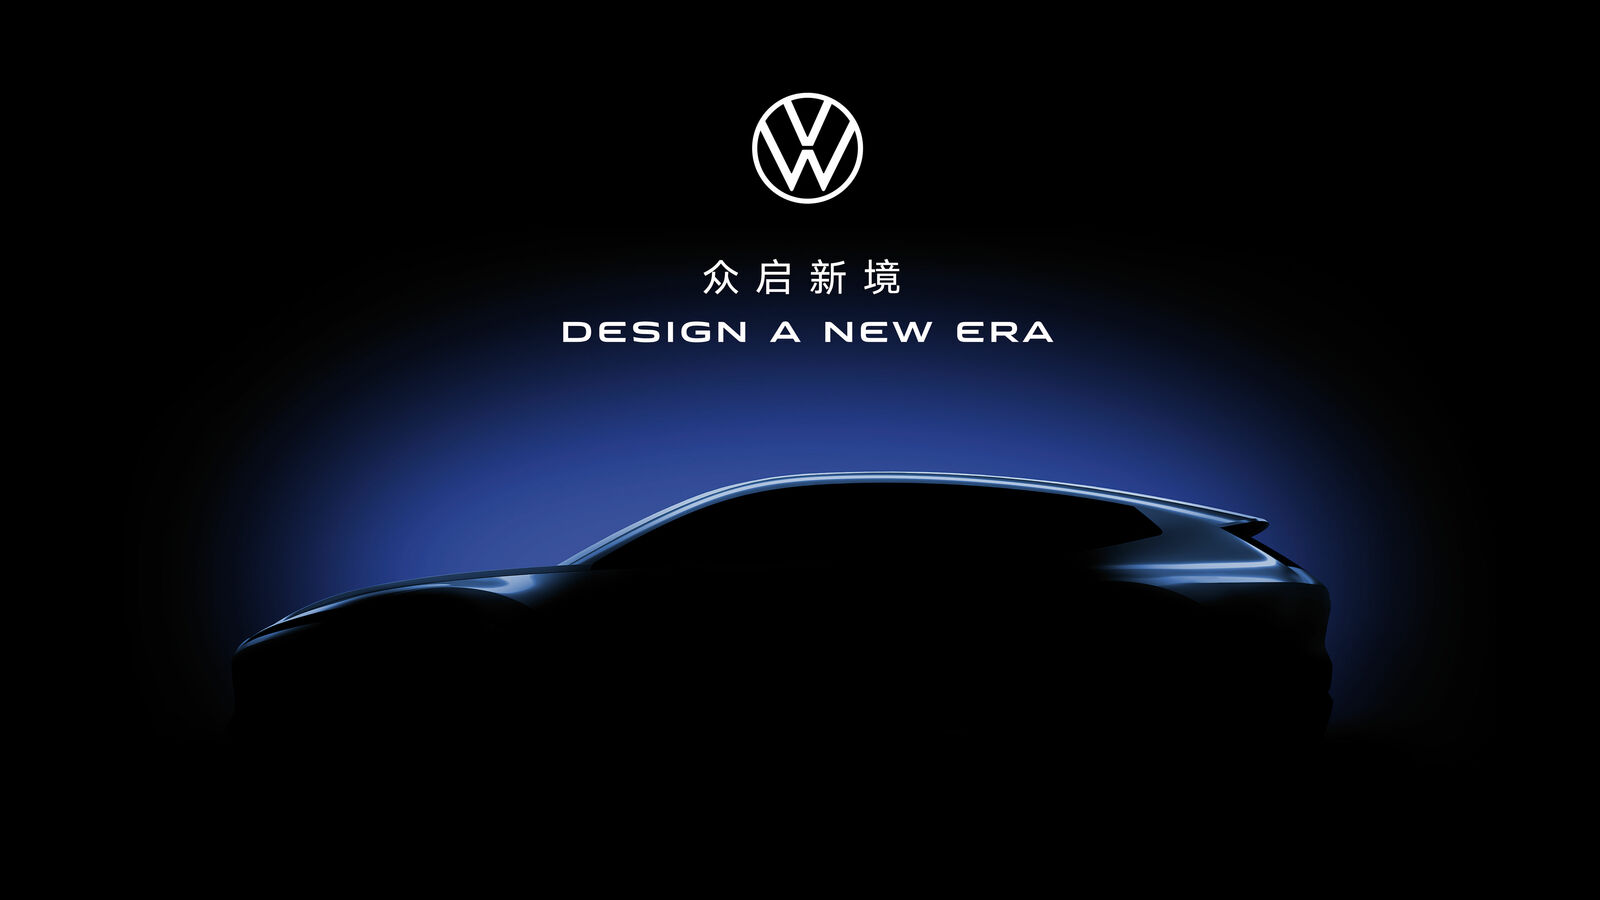 The Volkswagen brand will reveal a concept car tailored for Chinese consumers